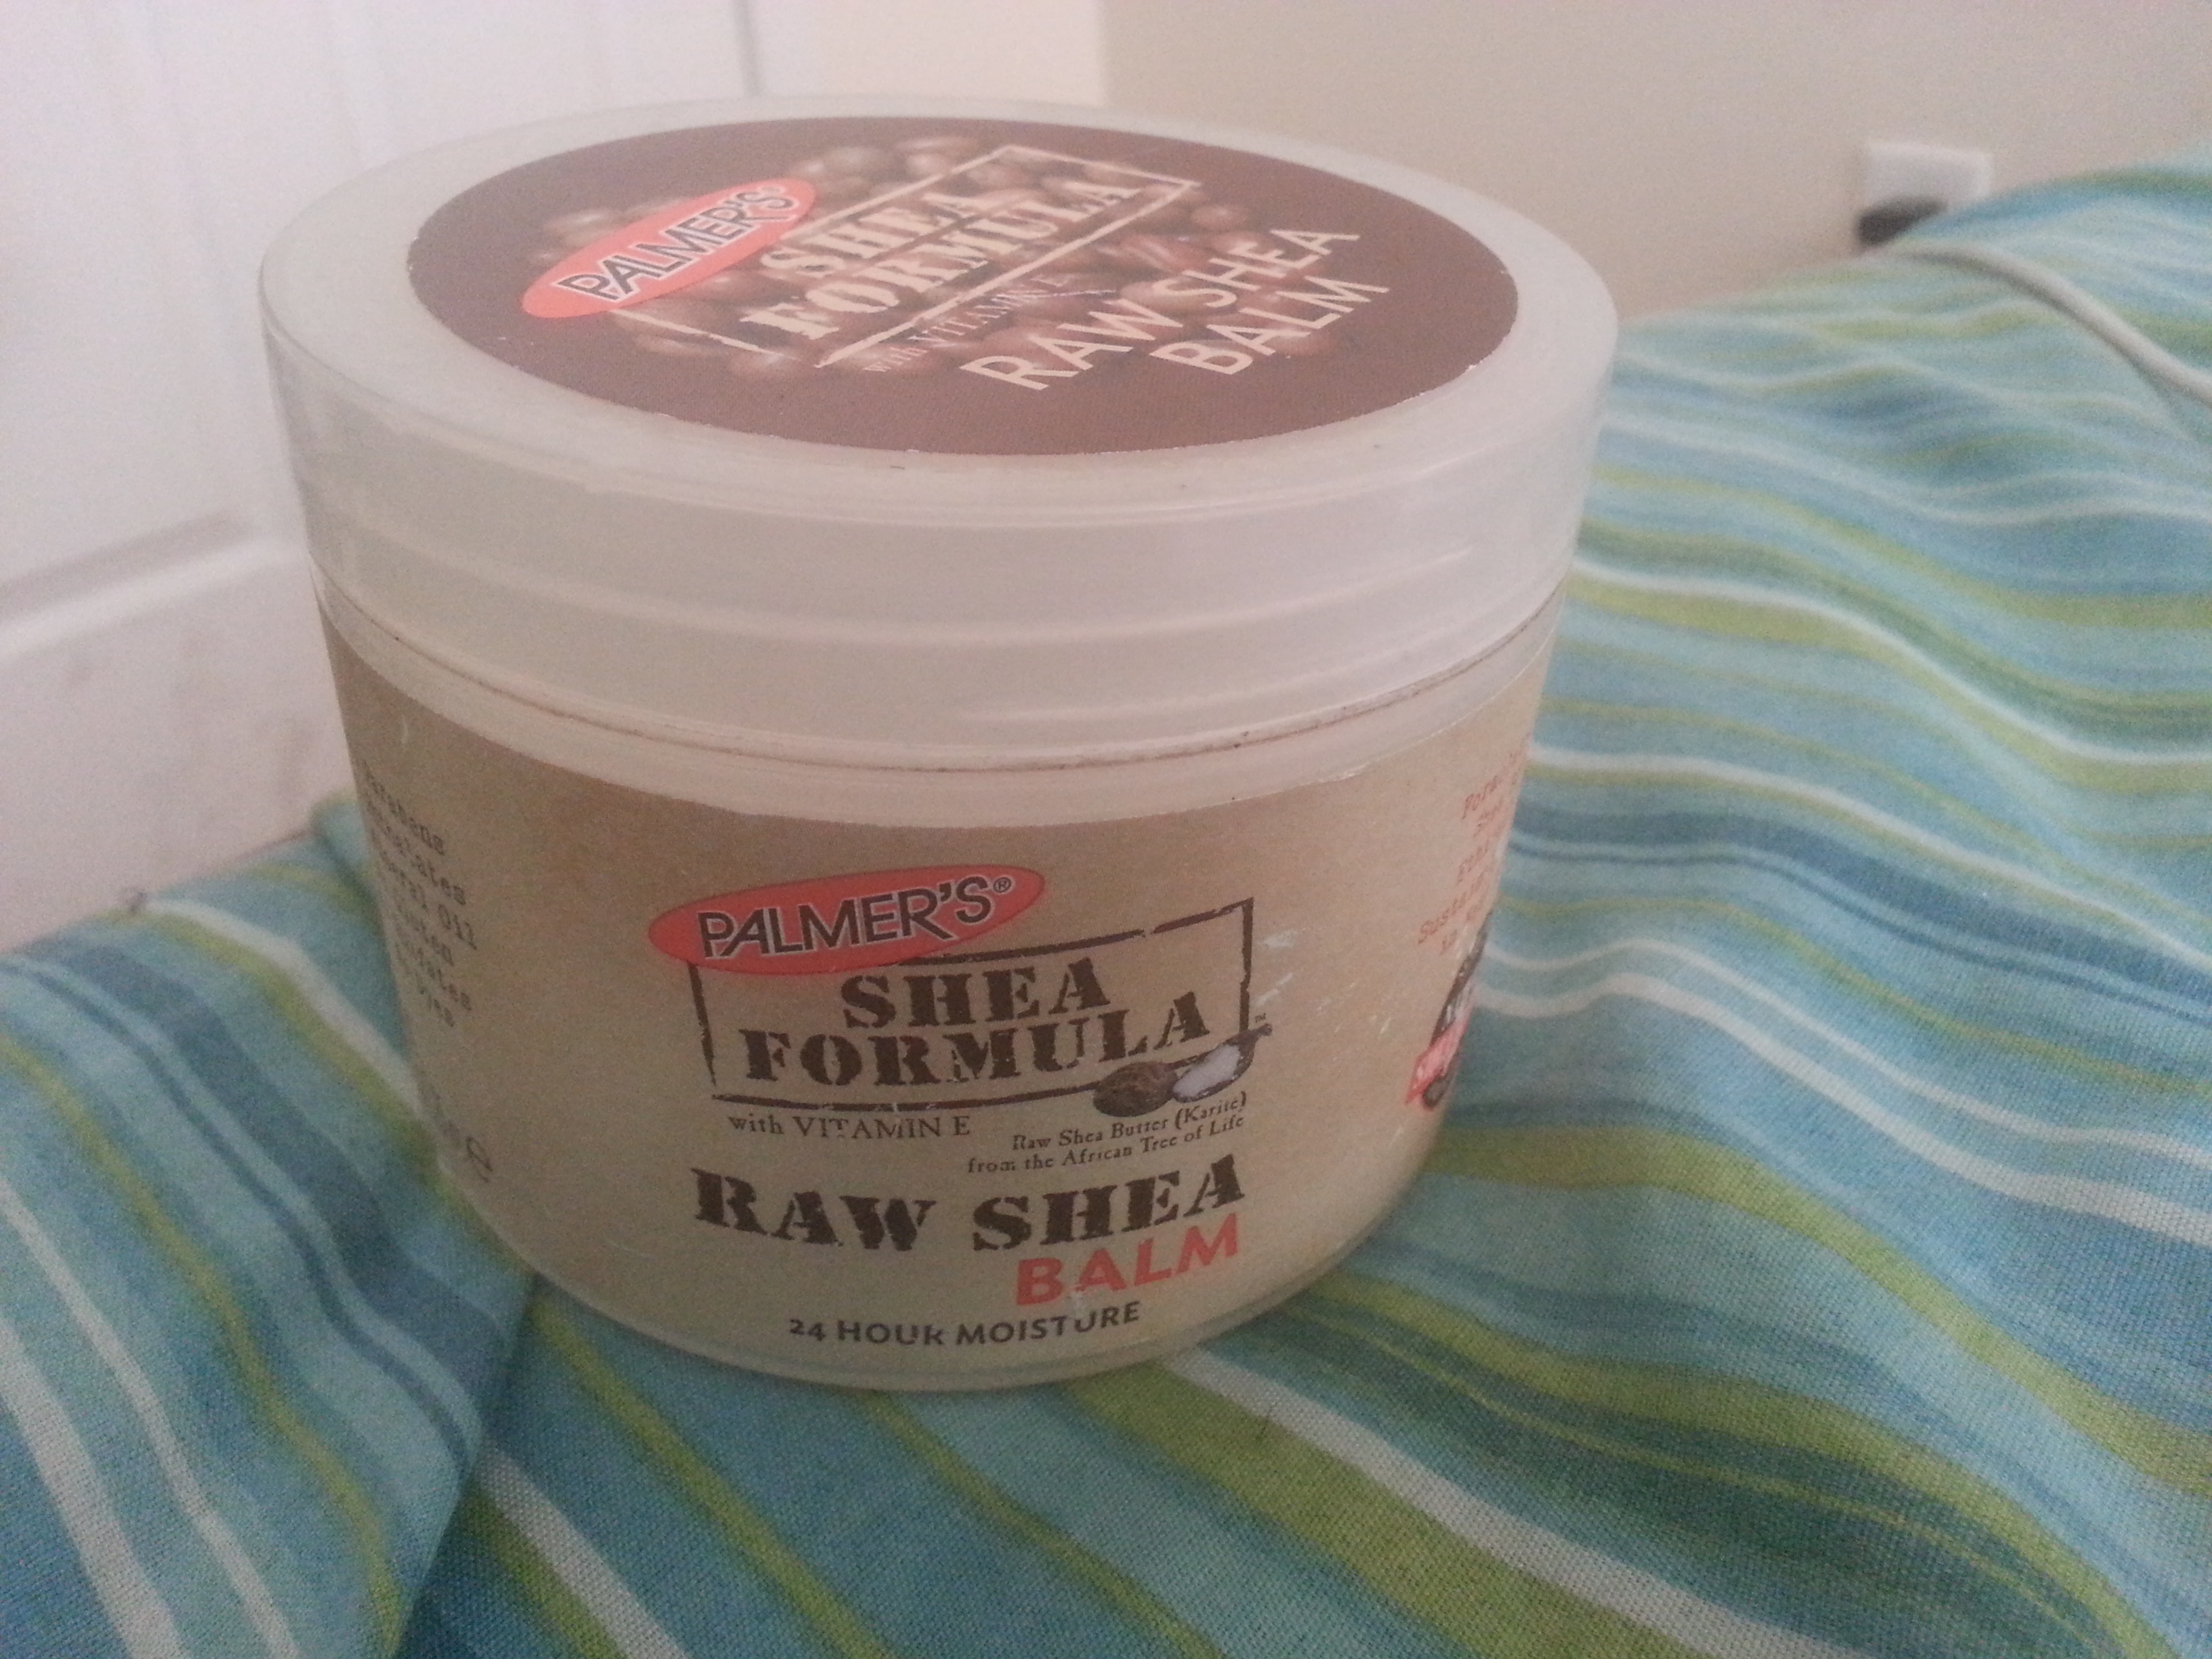 Product Review: RAW SHEA BALM